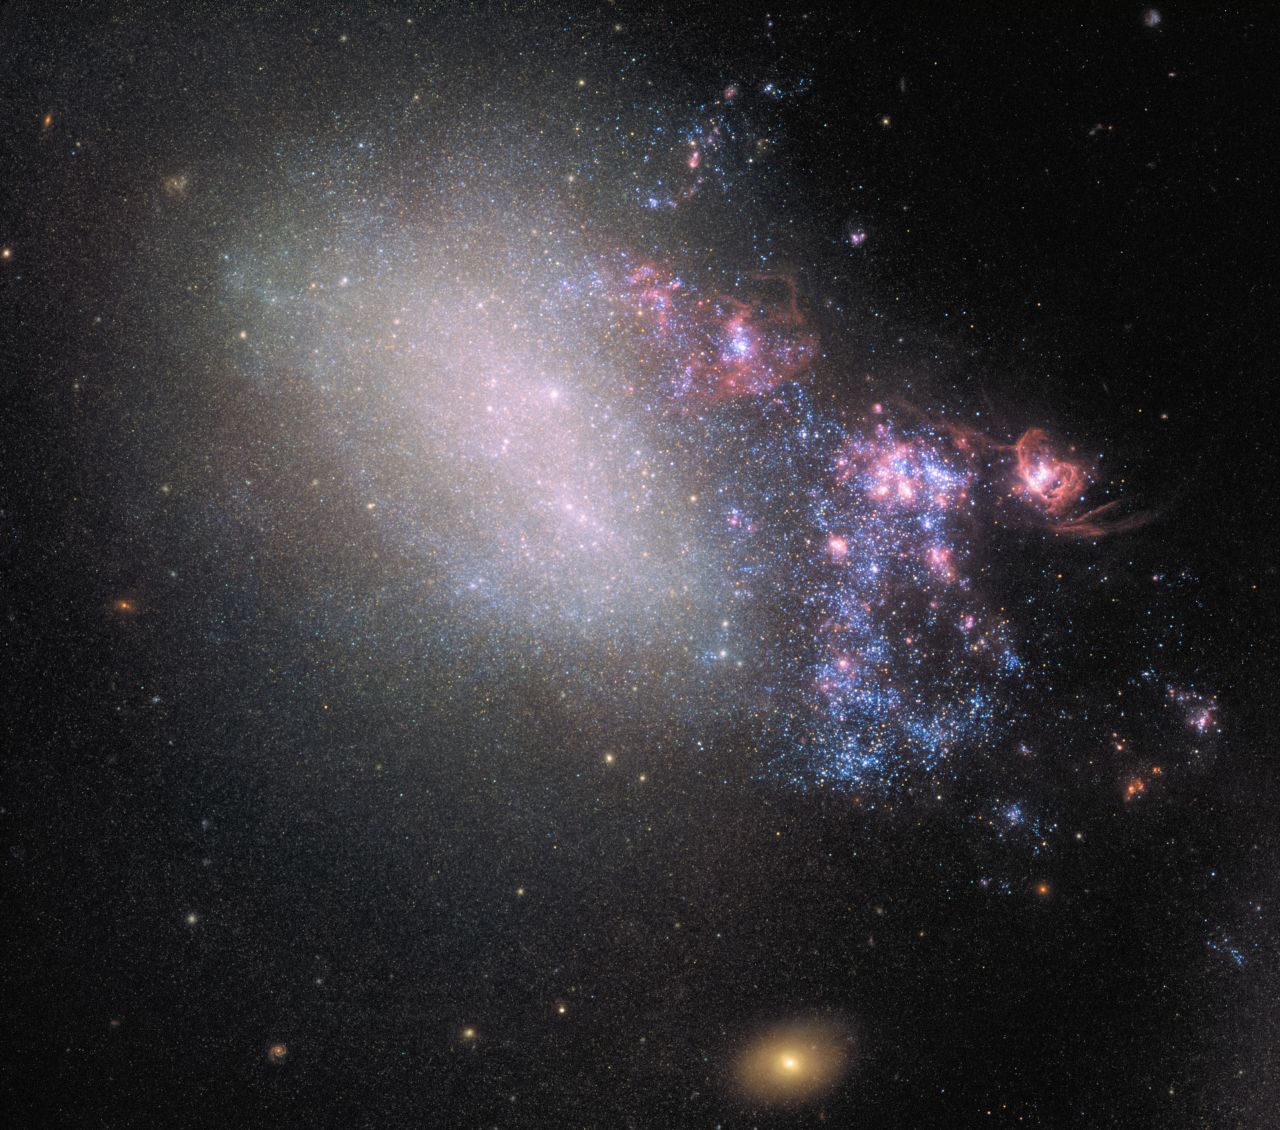 Galaxy NGC 4485 collided with its larger galactic neighbor NGC 4490 millions of years ago, leading to the creation of new stars seen in the right side of the image.